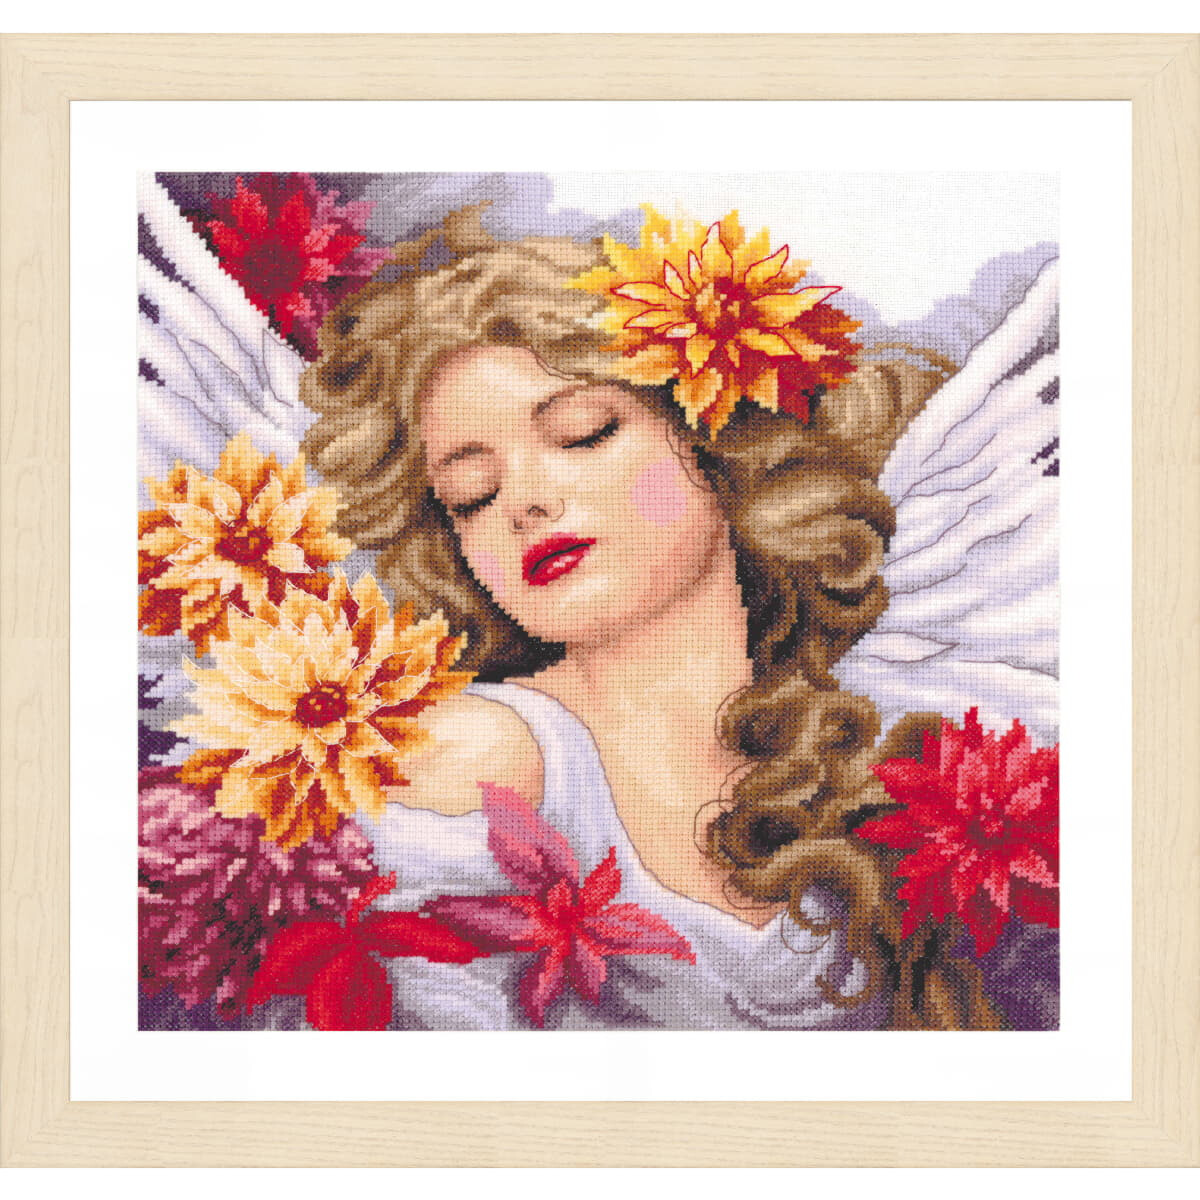 A framed embroidered picture shows a calm angel with...